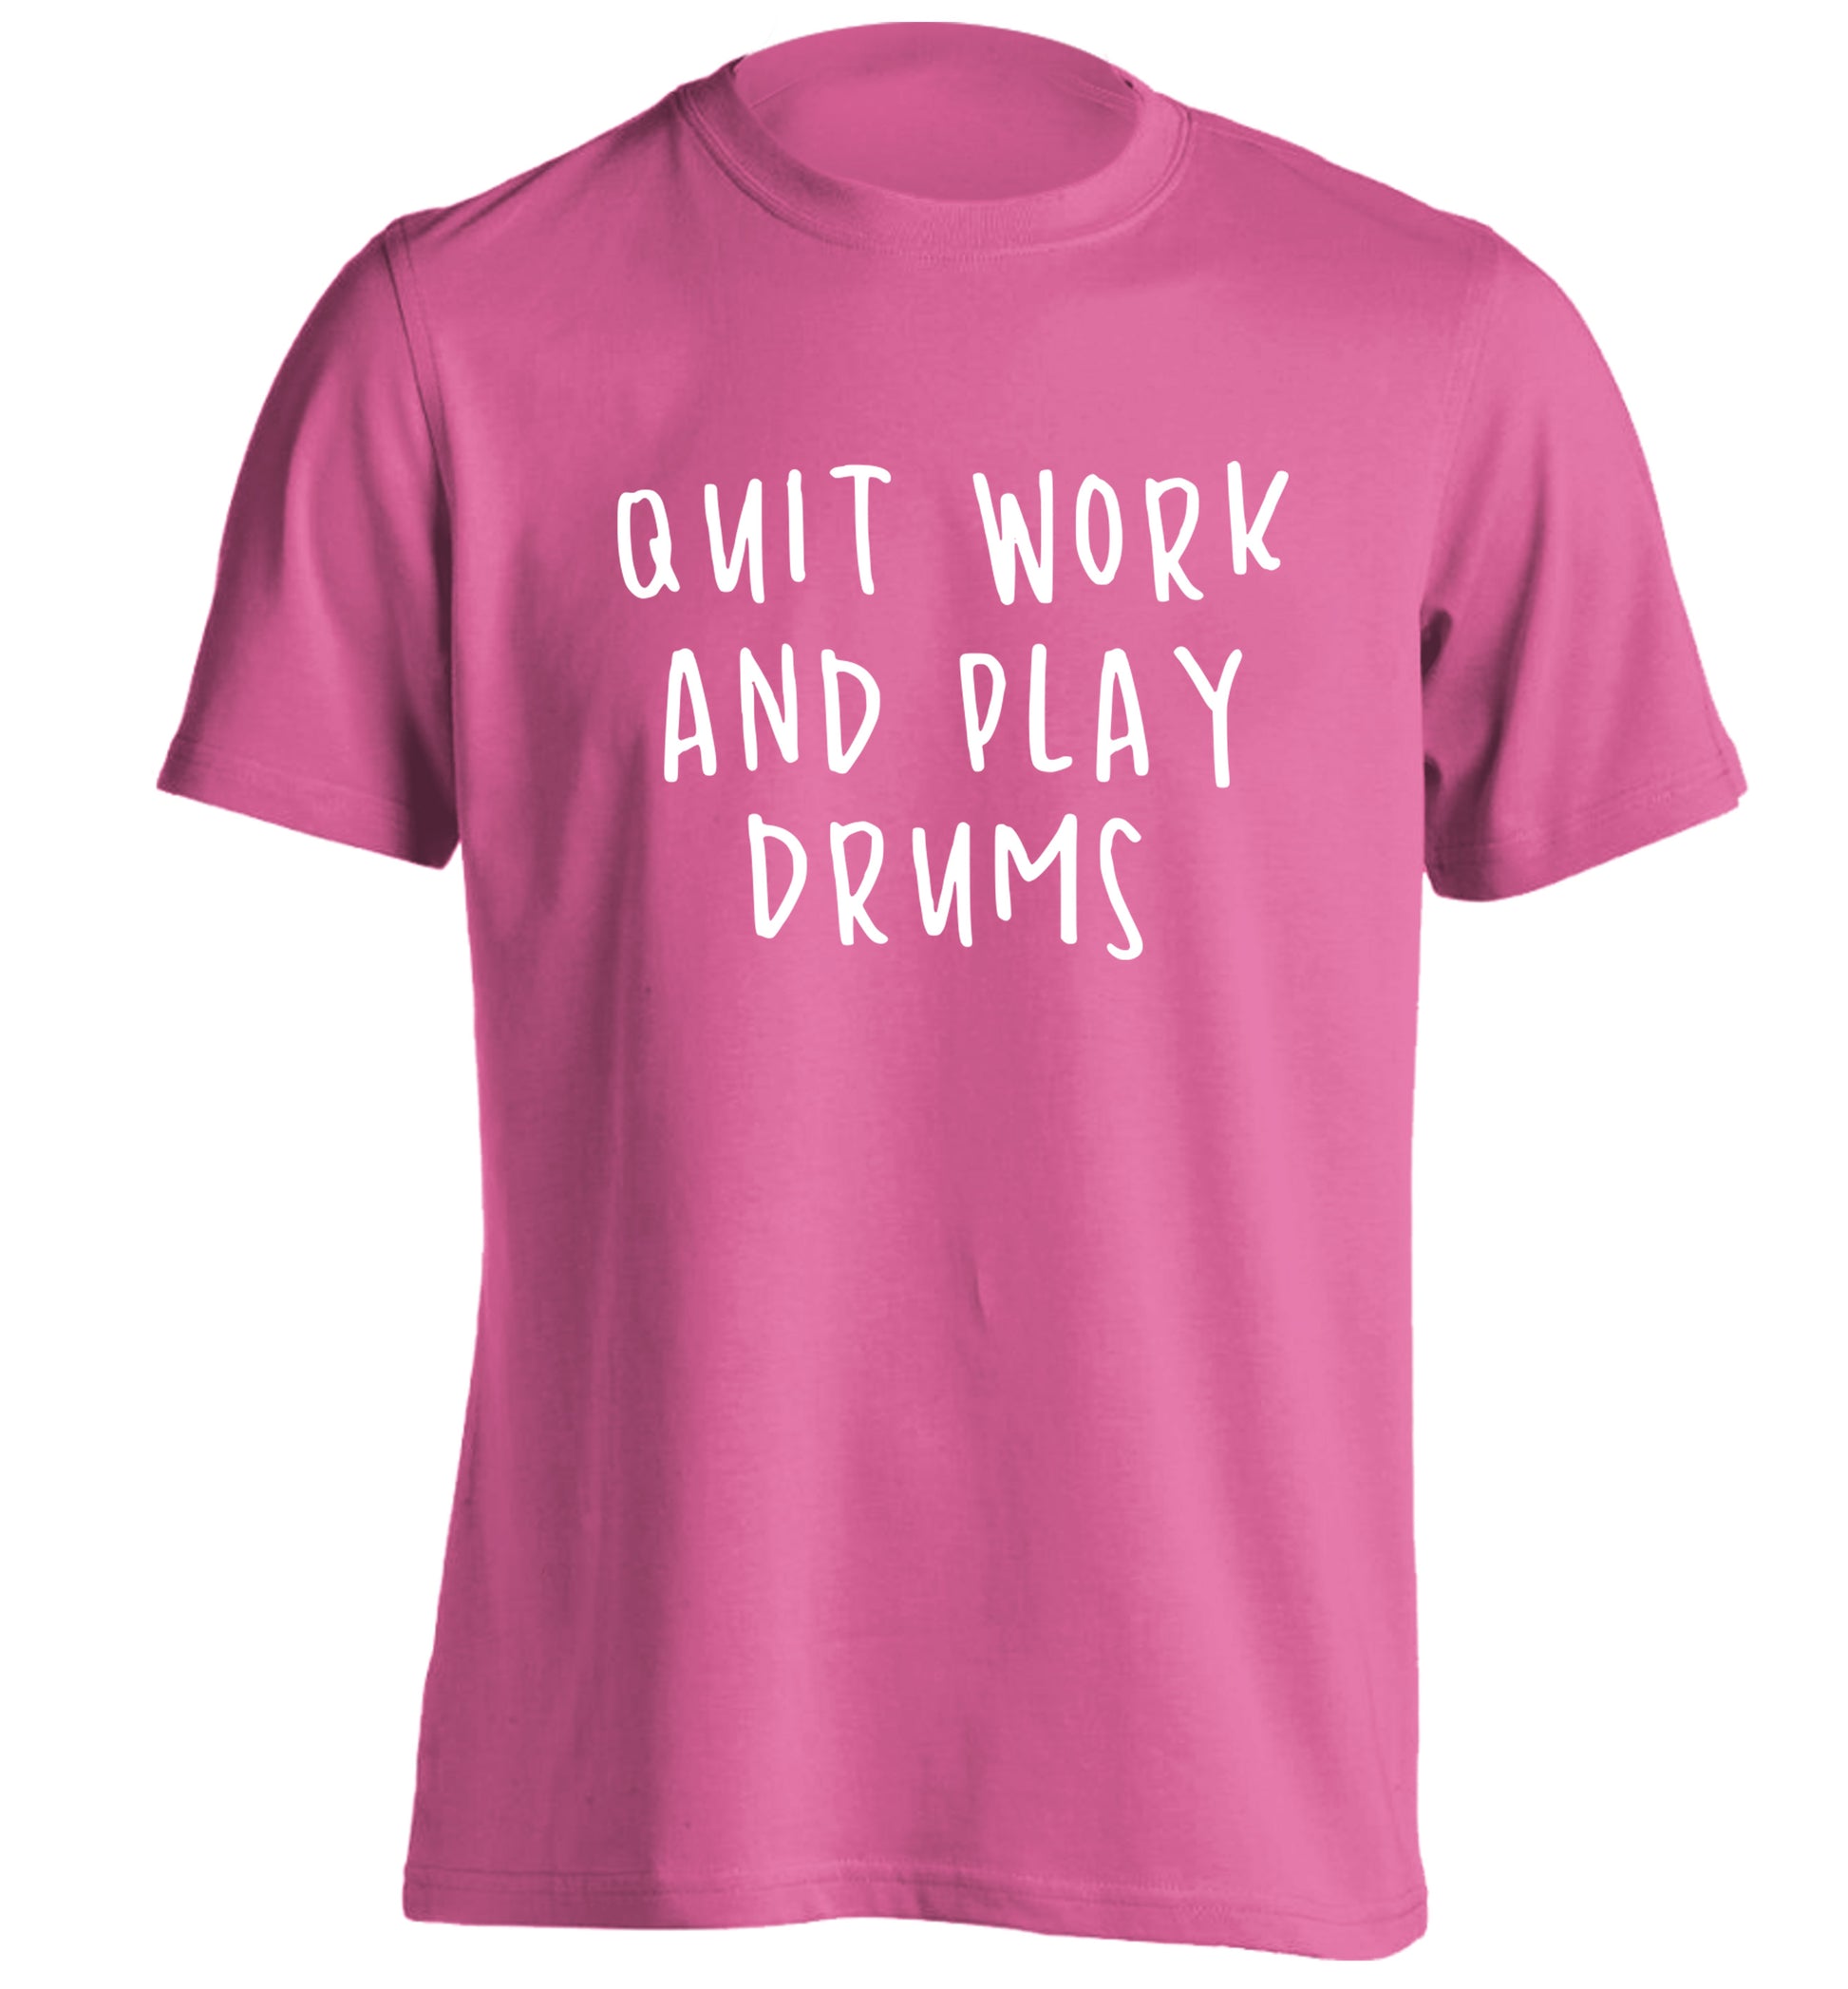 Quit work and play drums adults unisex pink Tshirt 2XL